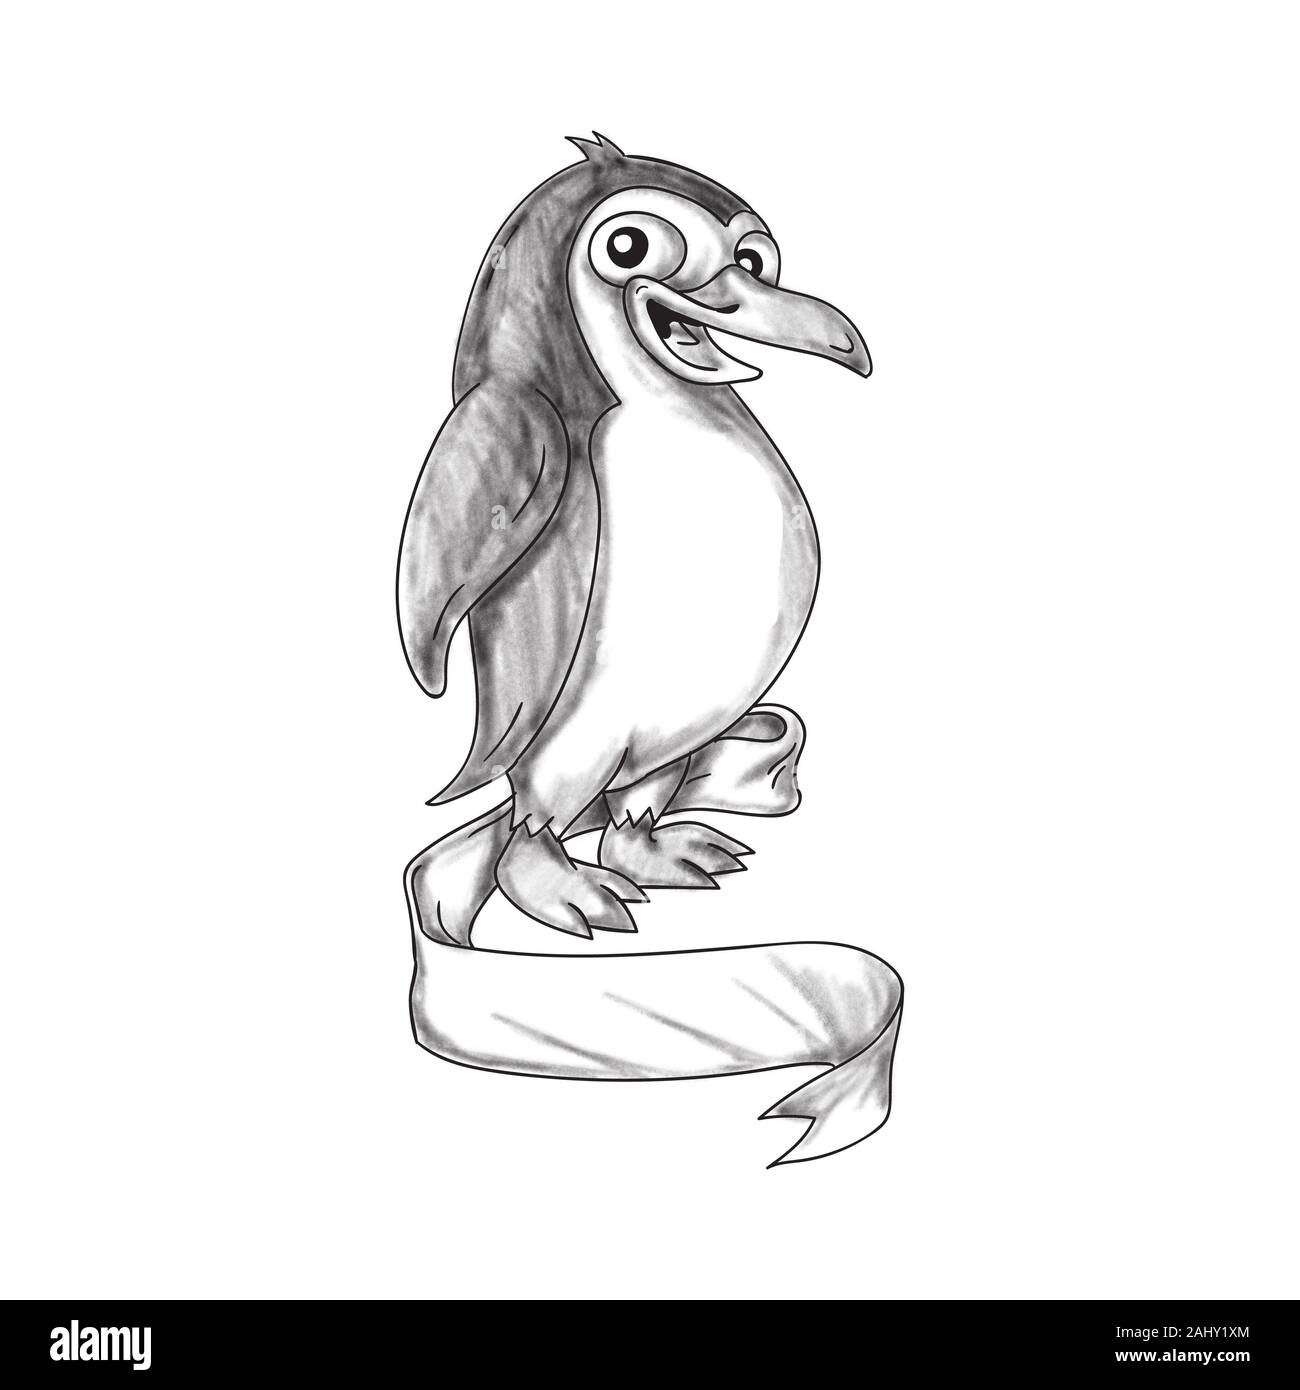 Tattoo style illustration of a Penguin an aquatic, flightless bird viewed from the side set on isolated white background with ribbon scroll. Stock Photo